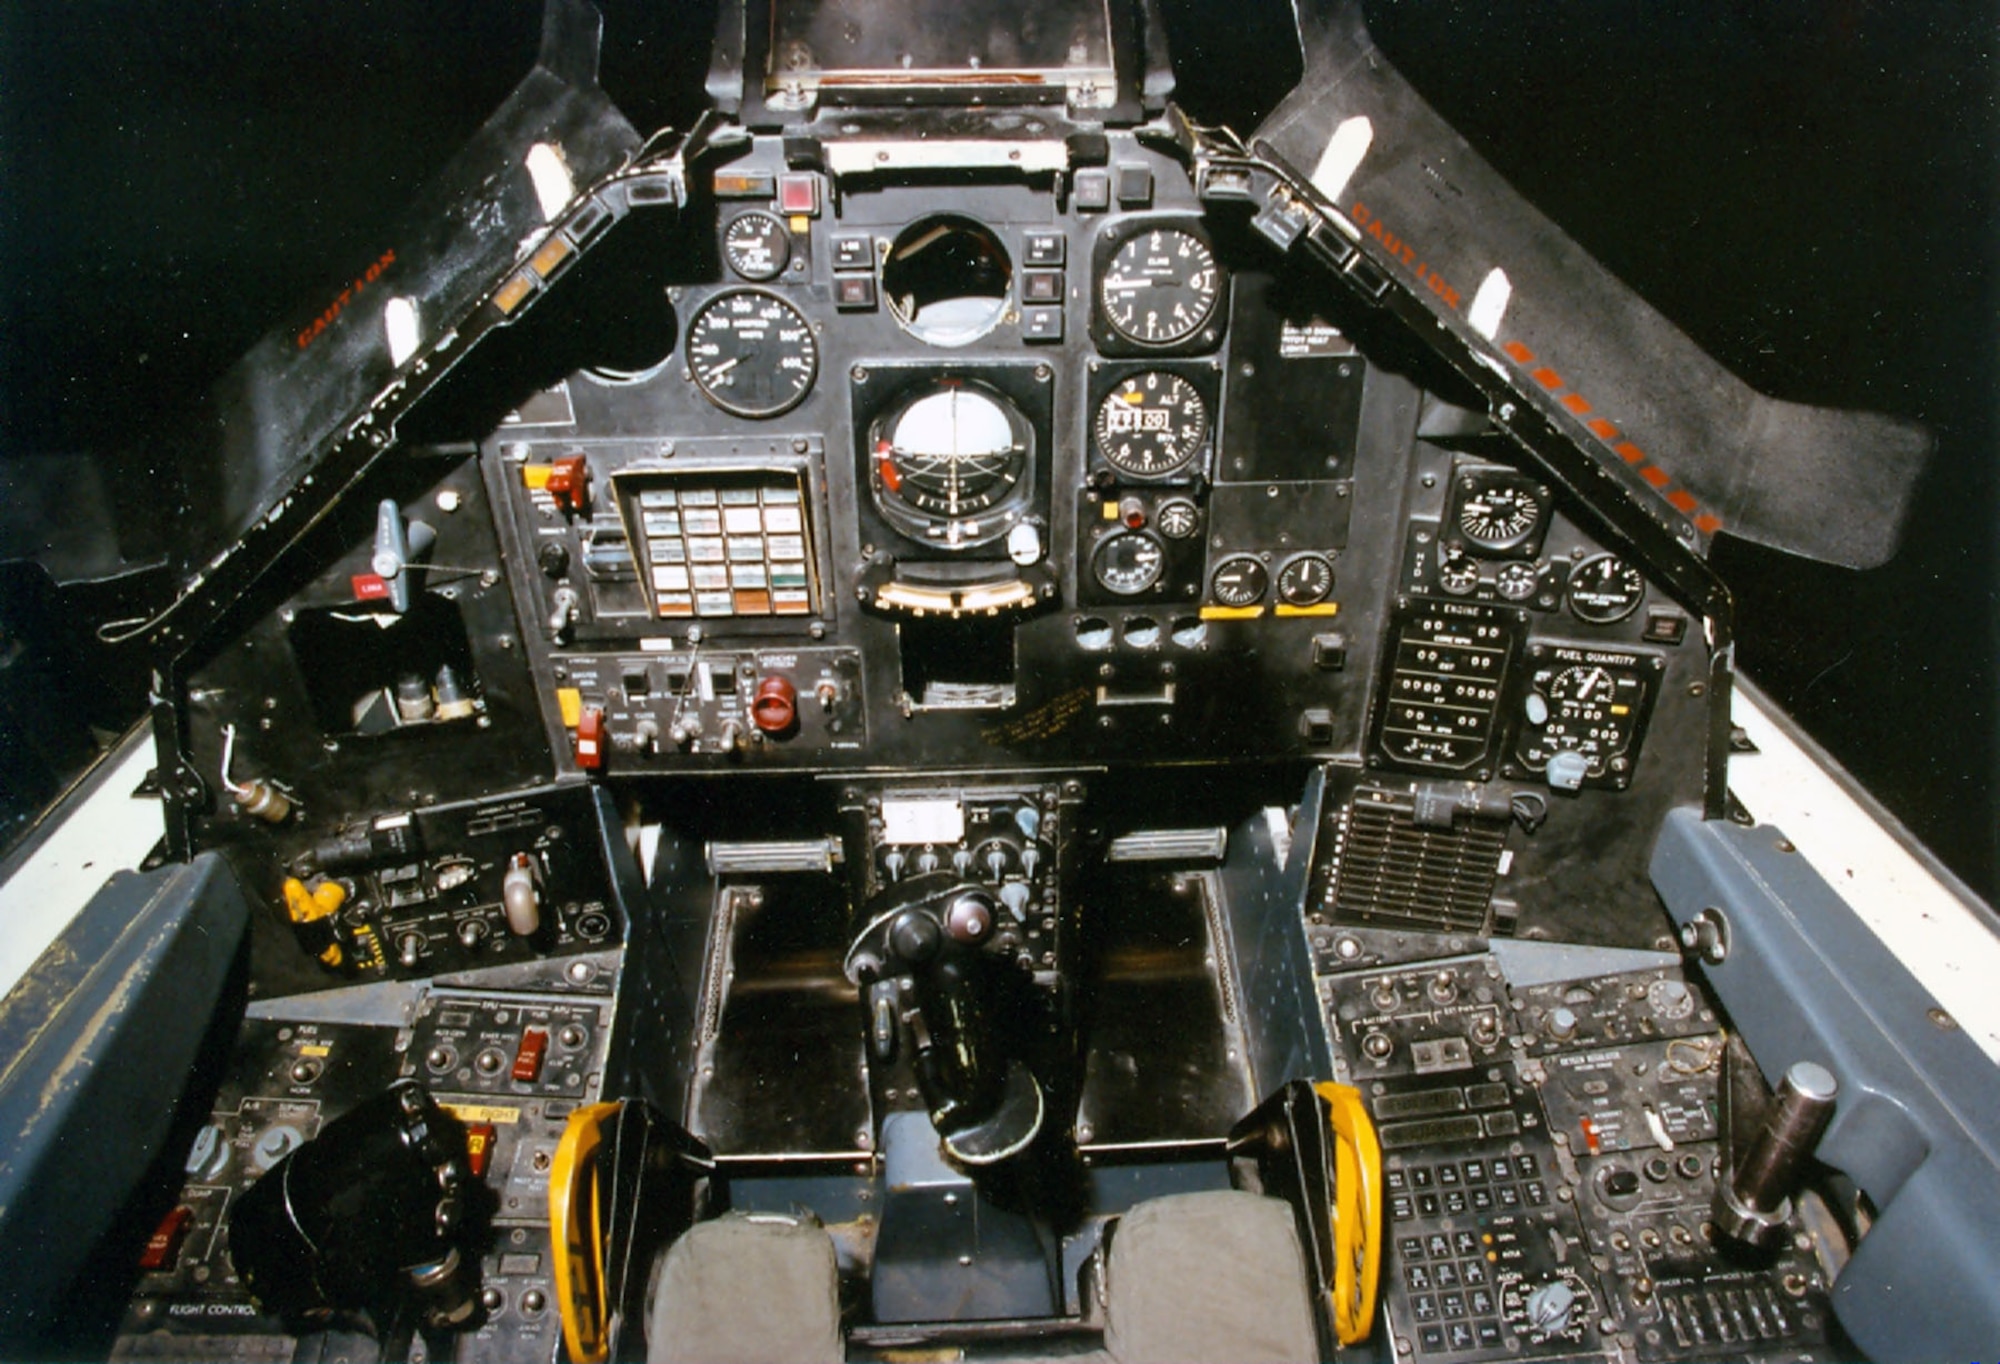 DAYTON, Ohio -- Lockheed F-117A cockpit at the National Museum of the United States Air Force. (U.S. Air Force photo)